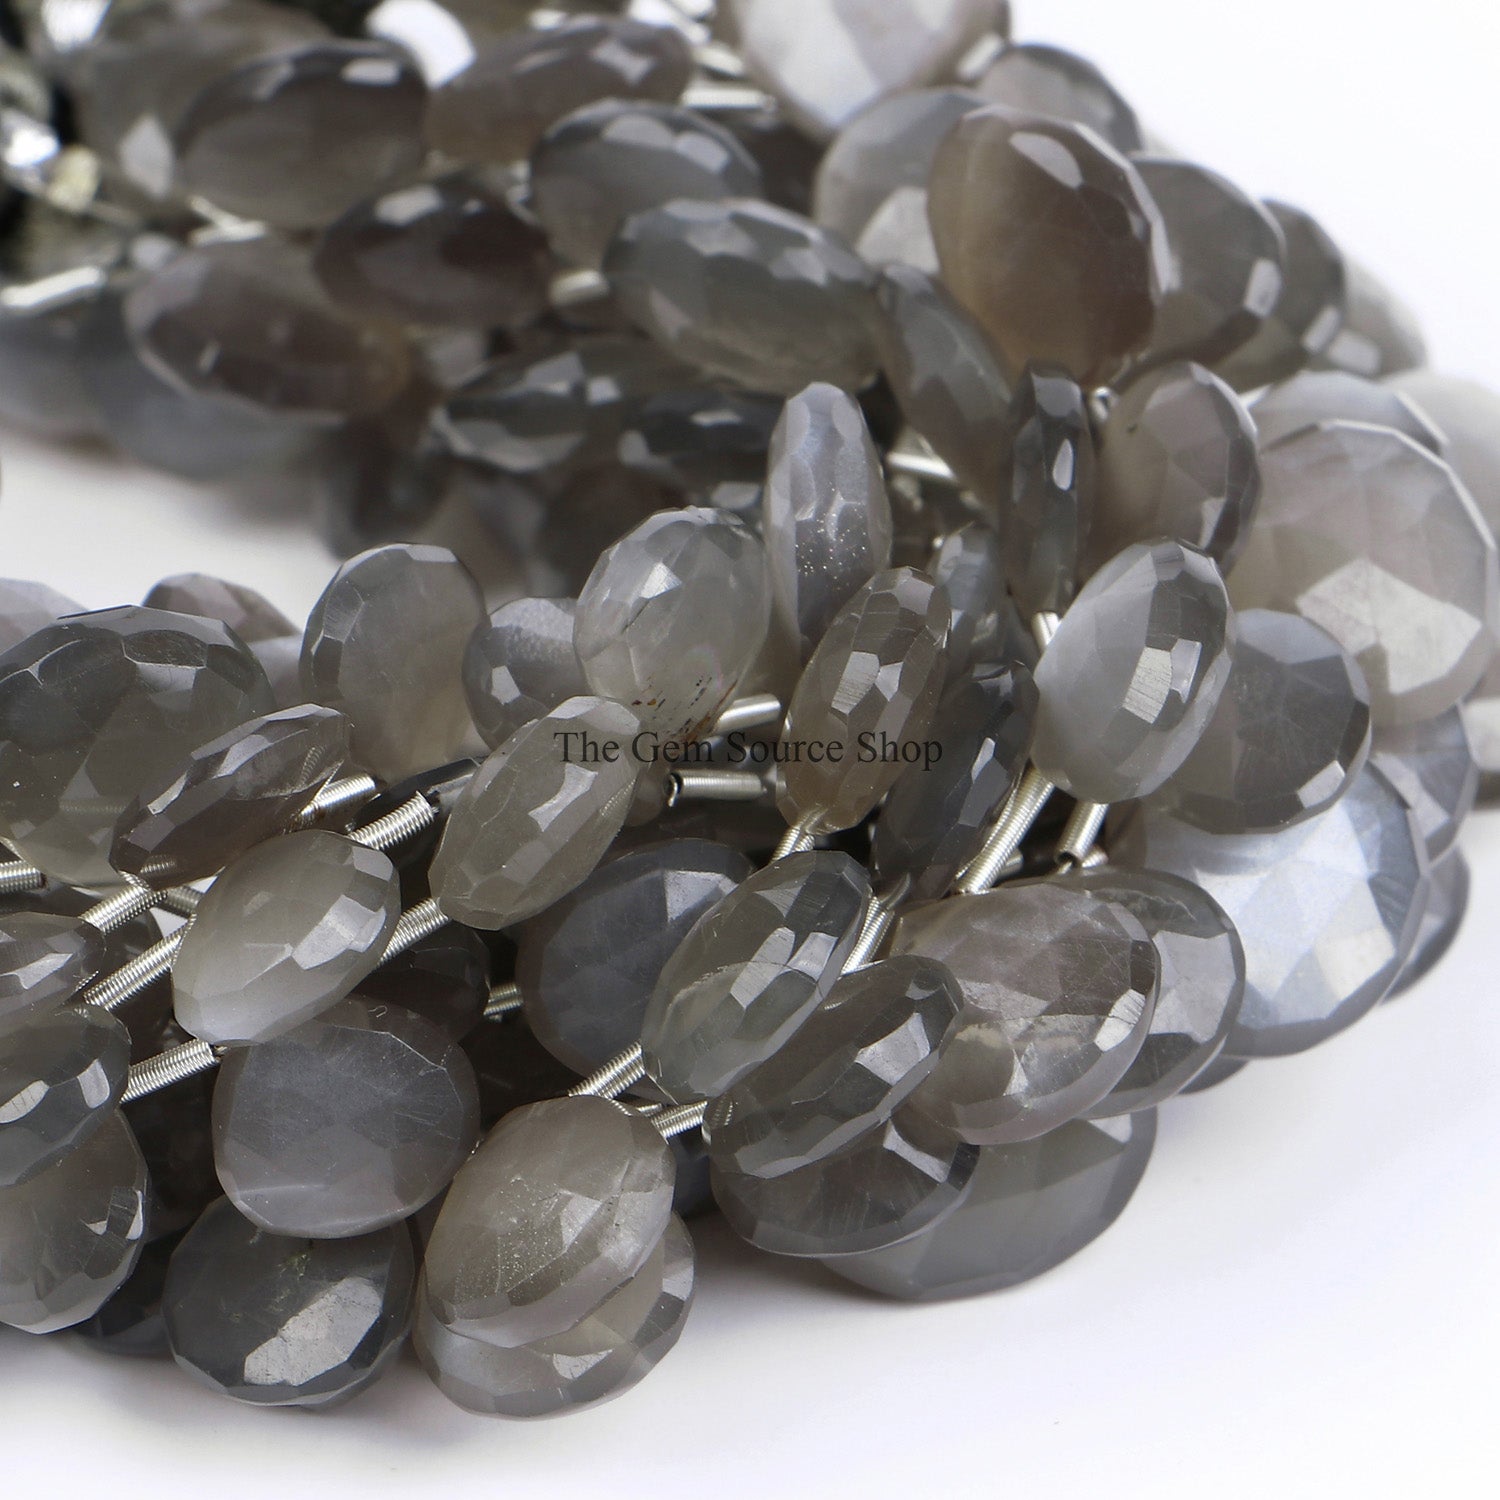 Grey Moonstone Beads, Moonstone Faceted Beads, Grey Moonstone Heart Shape Beads, Wholesale Beads